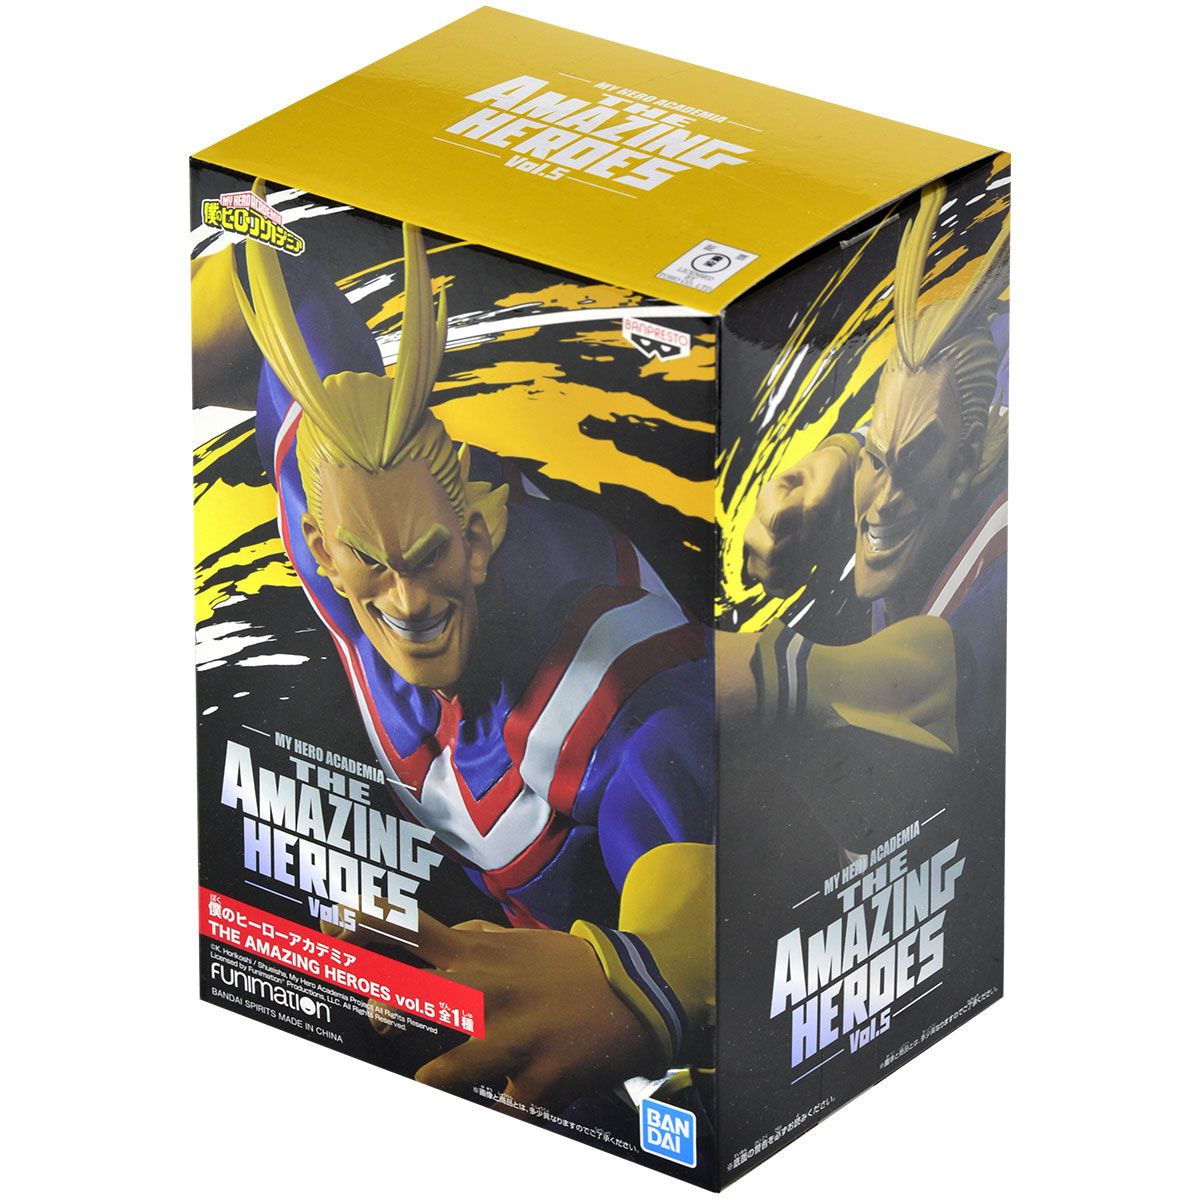 MY HERO ACADEMIA THE AMAZING HEROES VOL5 ALL MIGHT